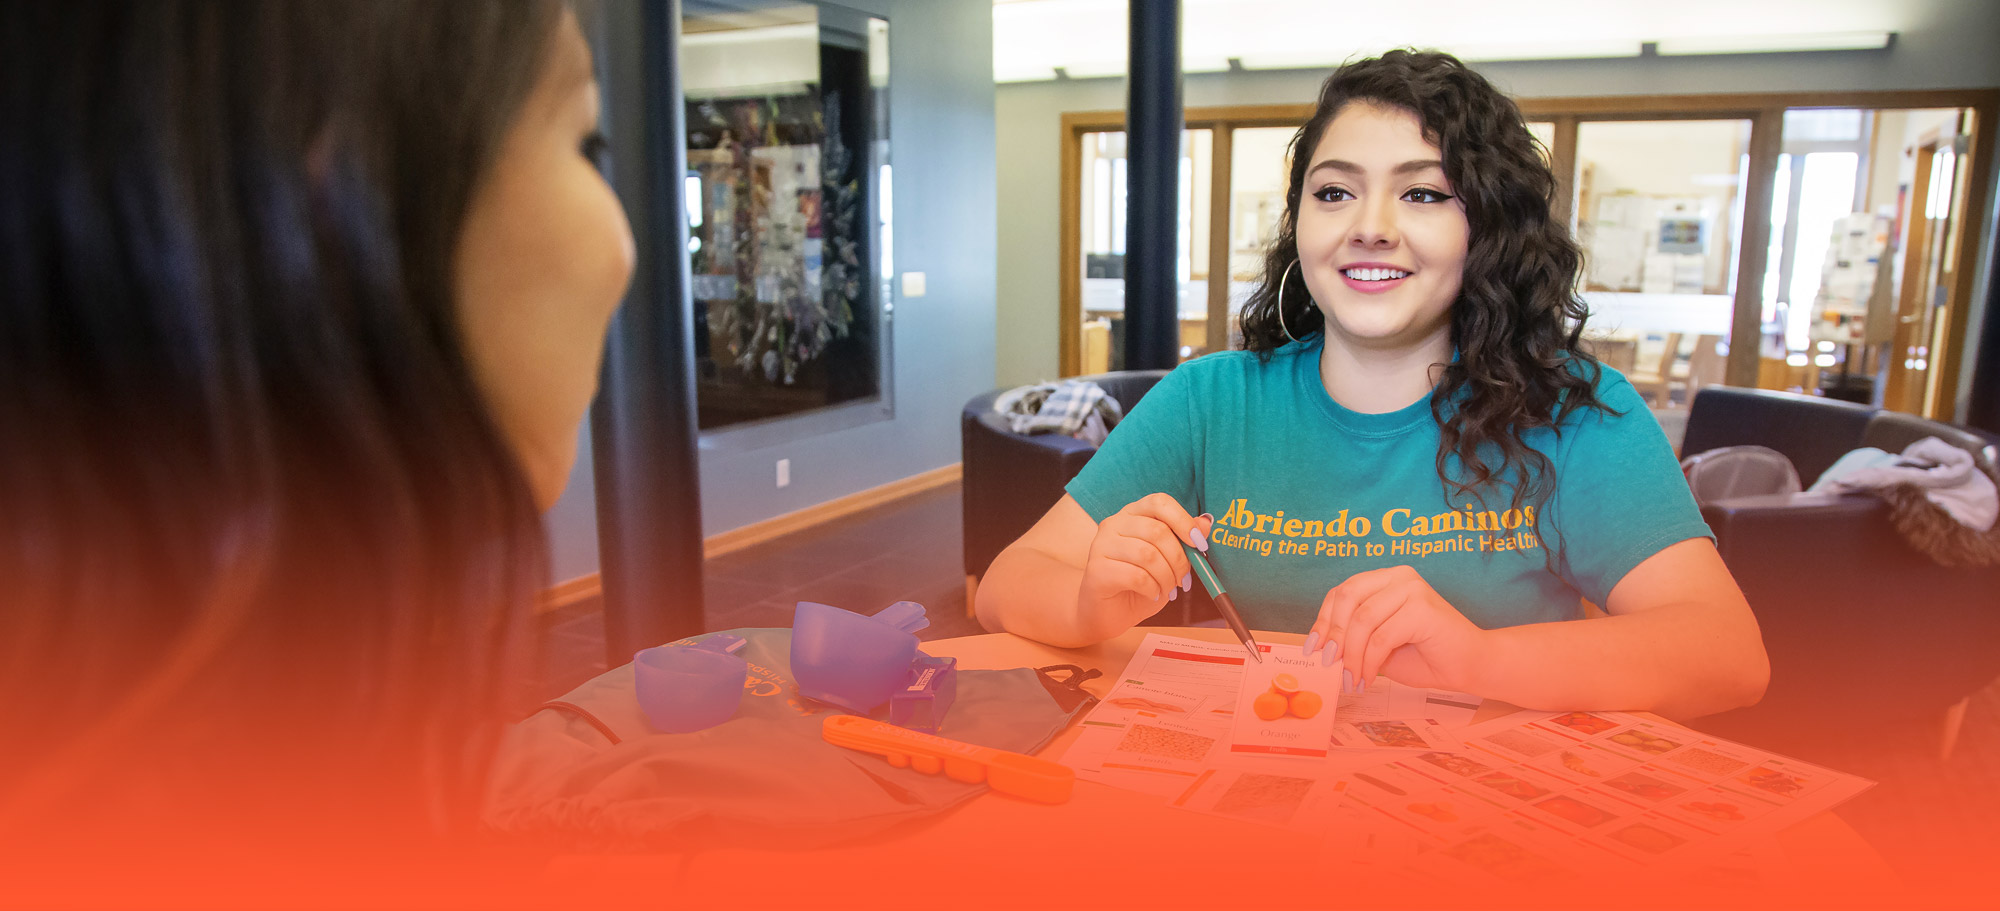 Undergraduate research assistant for Abriendo Caminos: Clearing the Path to Hispanic Health which is a health promotion program for Latino families through culturally sensitive workshops on healthy lifestyle behaviors